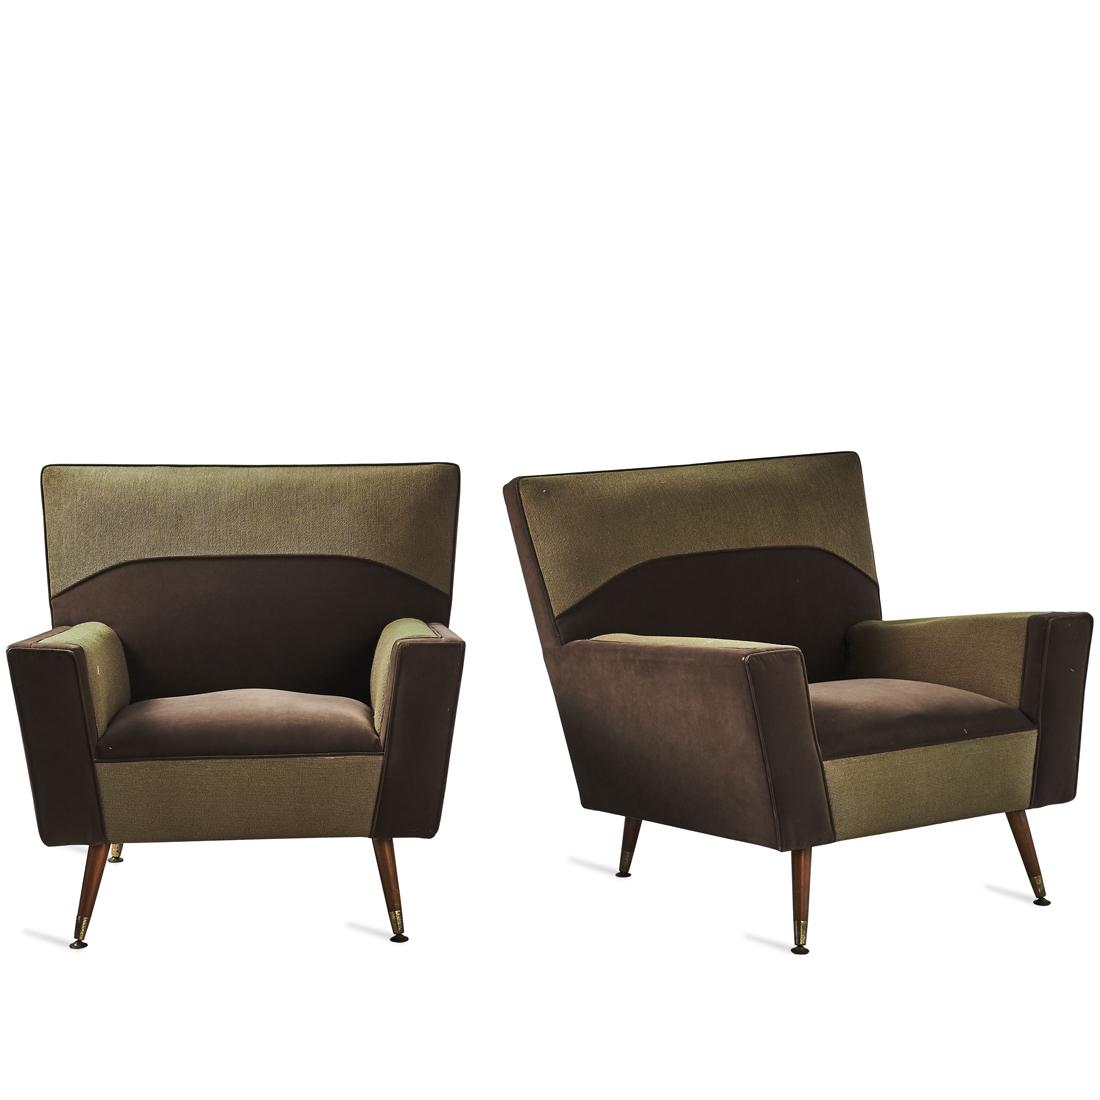 A Pair of Lounge Chairs - Price Estimate: $900 - $1200